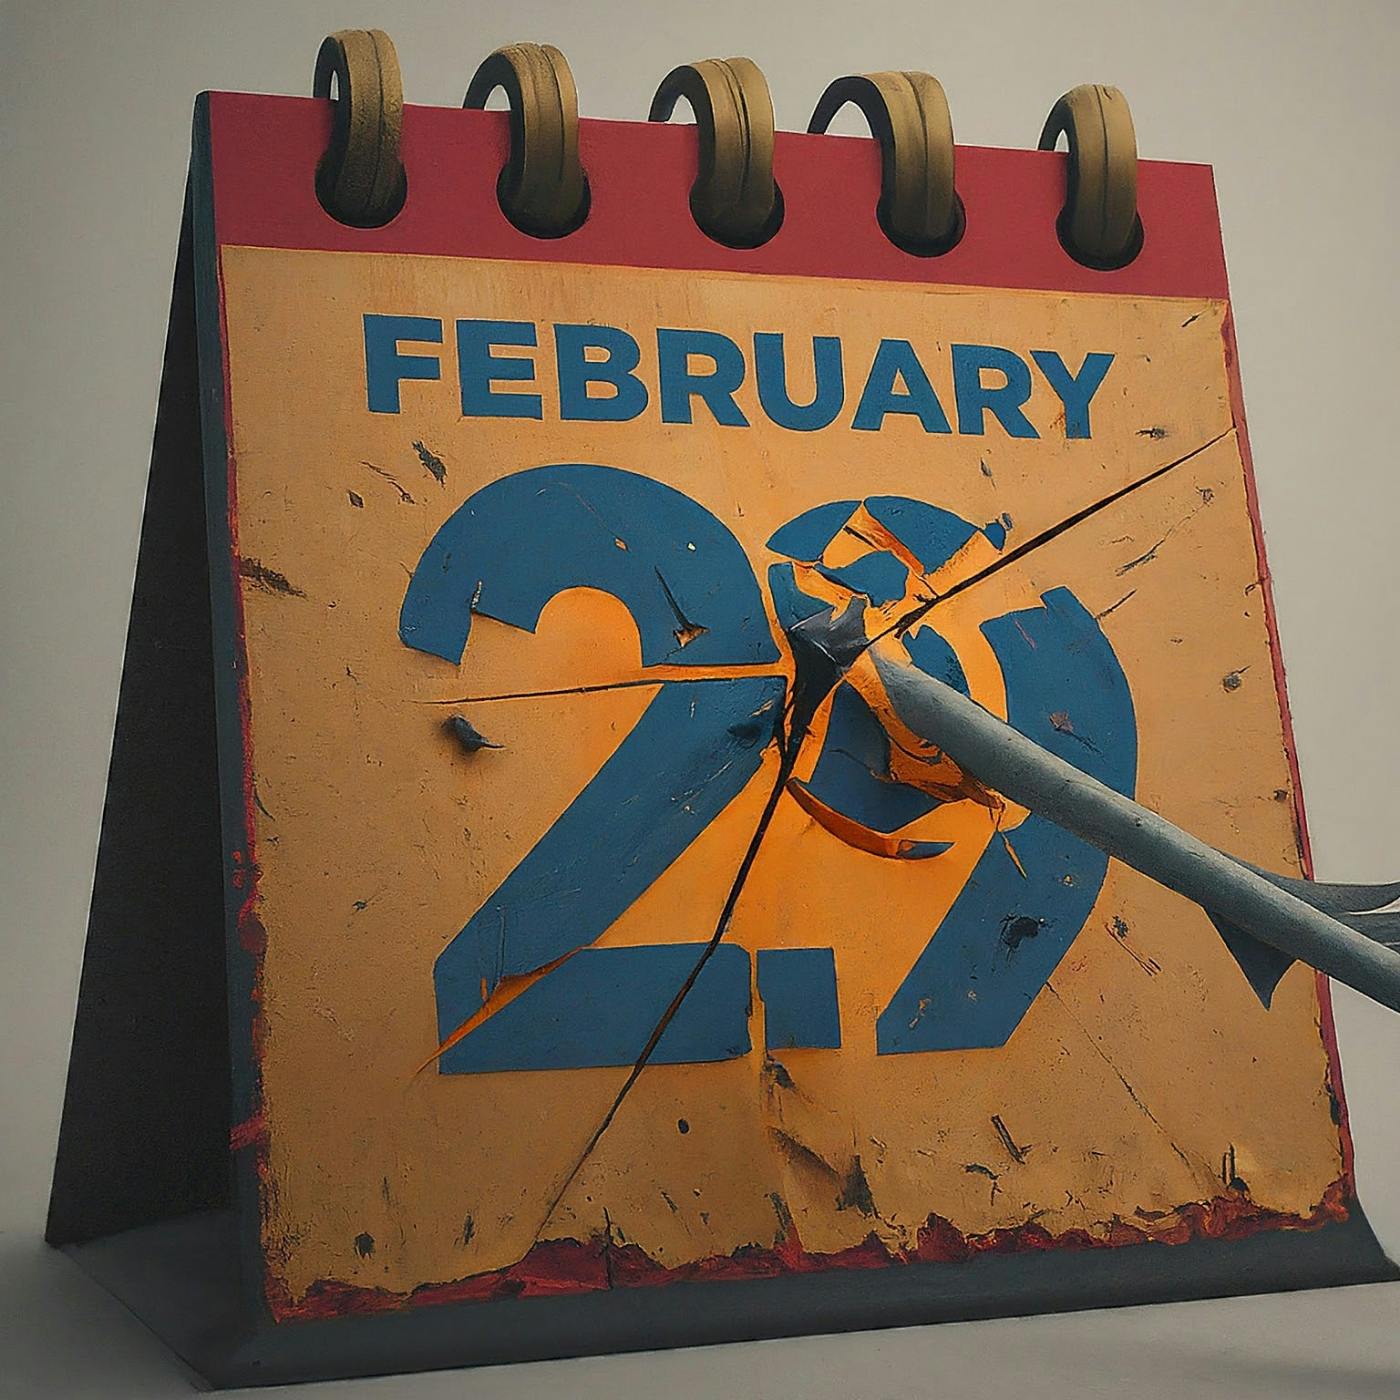 Rethinking Leap Years: Why Your Favorite Programming Language's Approach May Be Flawed